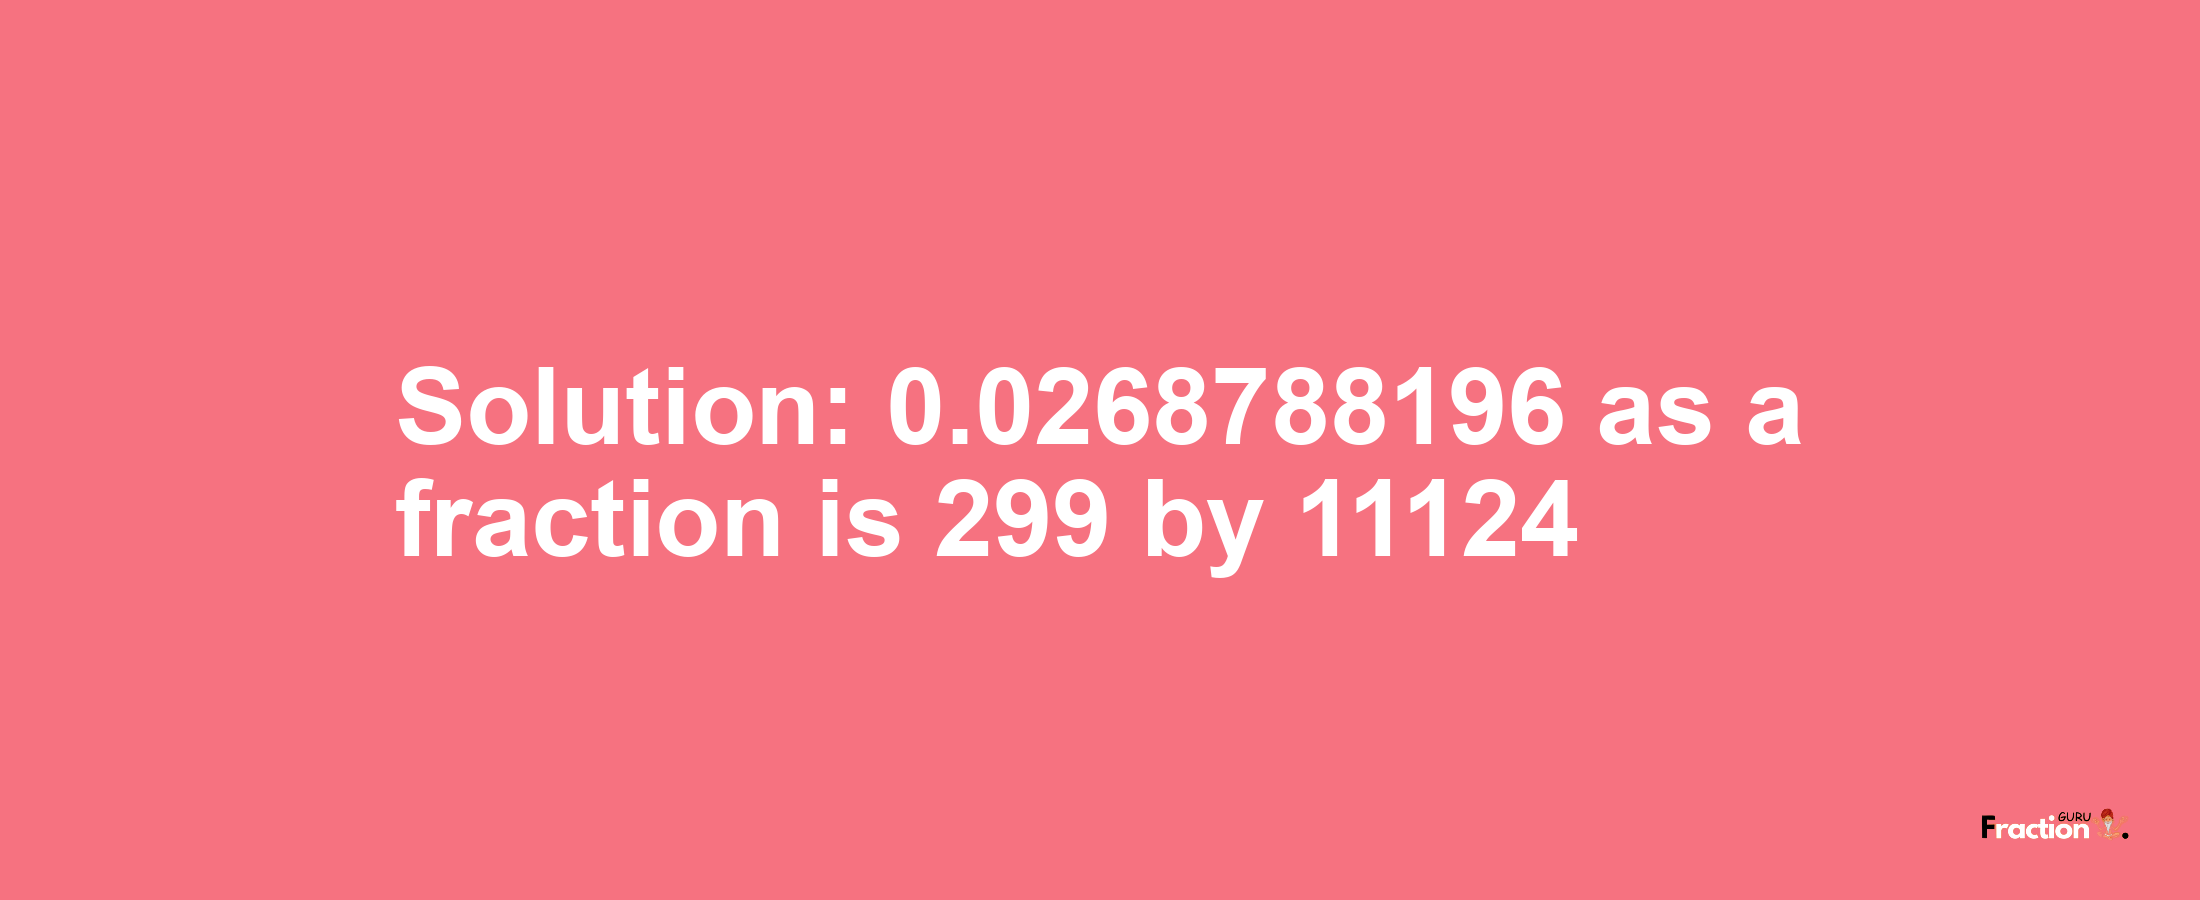 Solution:0.0268788196 as a fraction is 299/11124